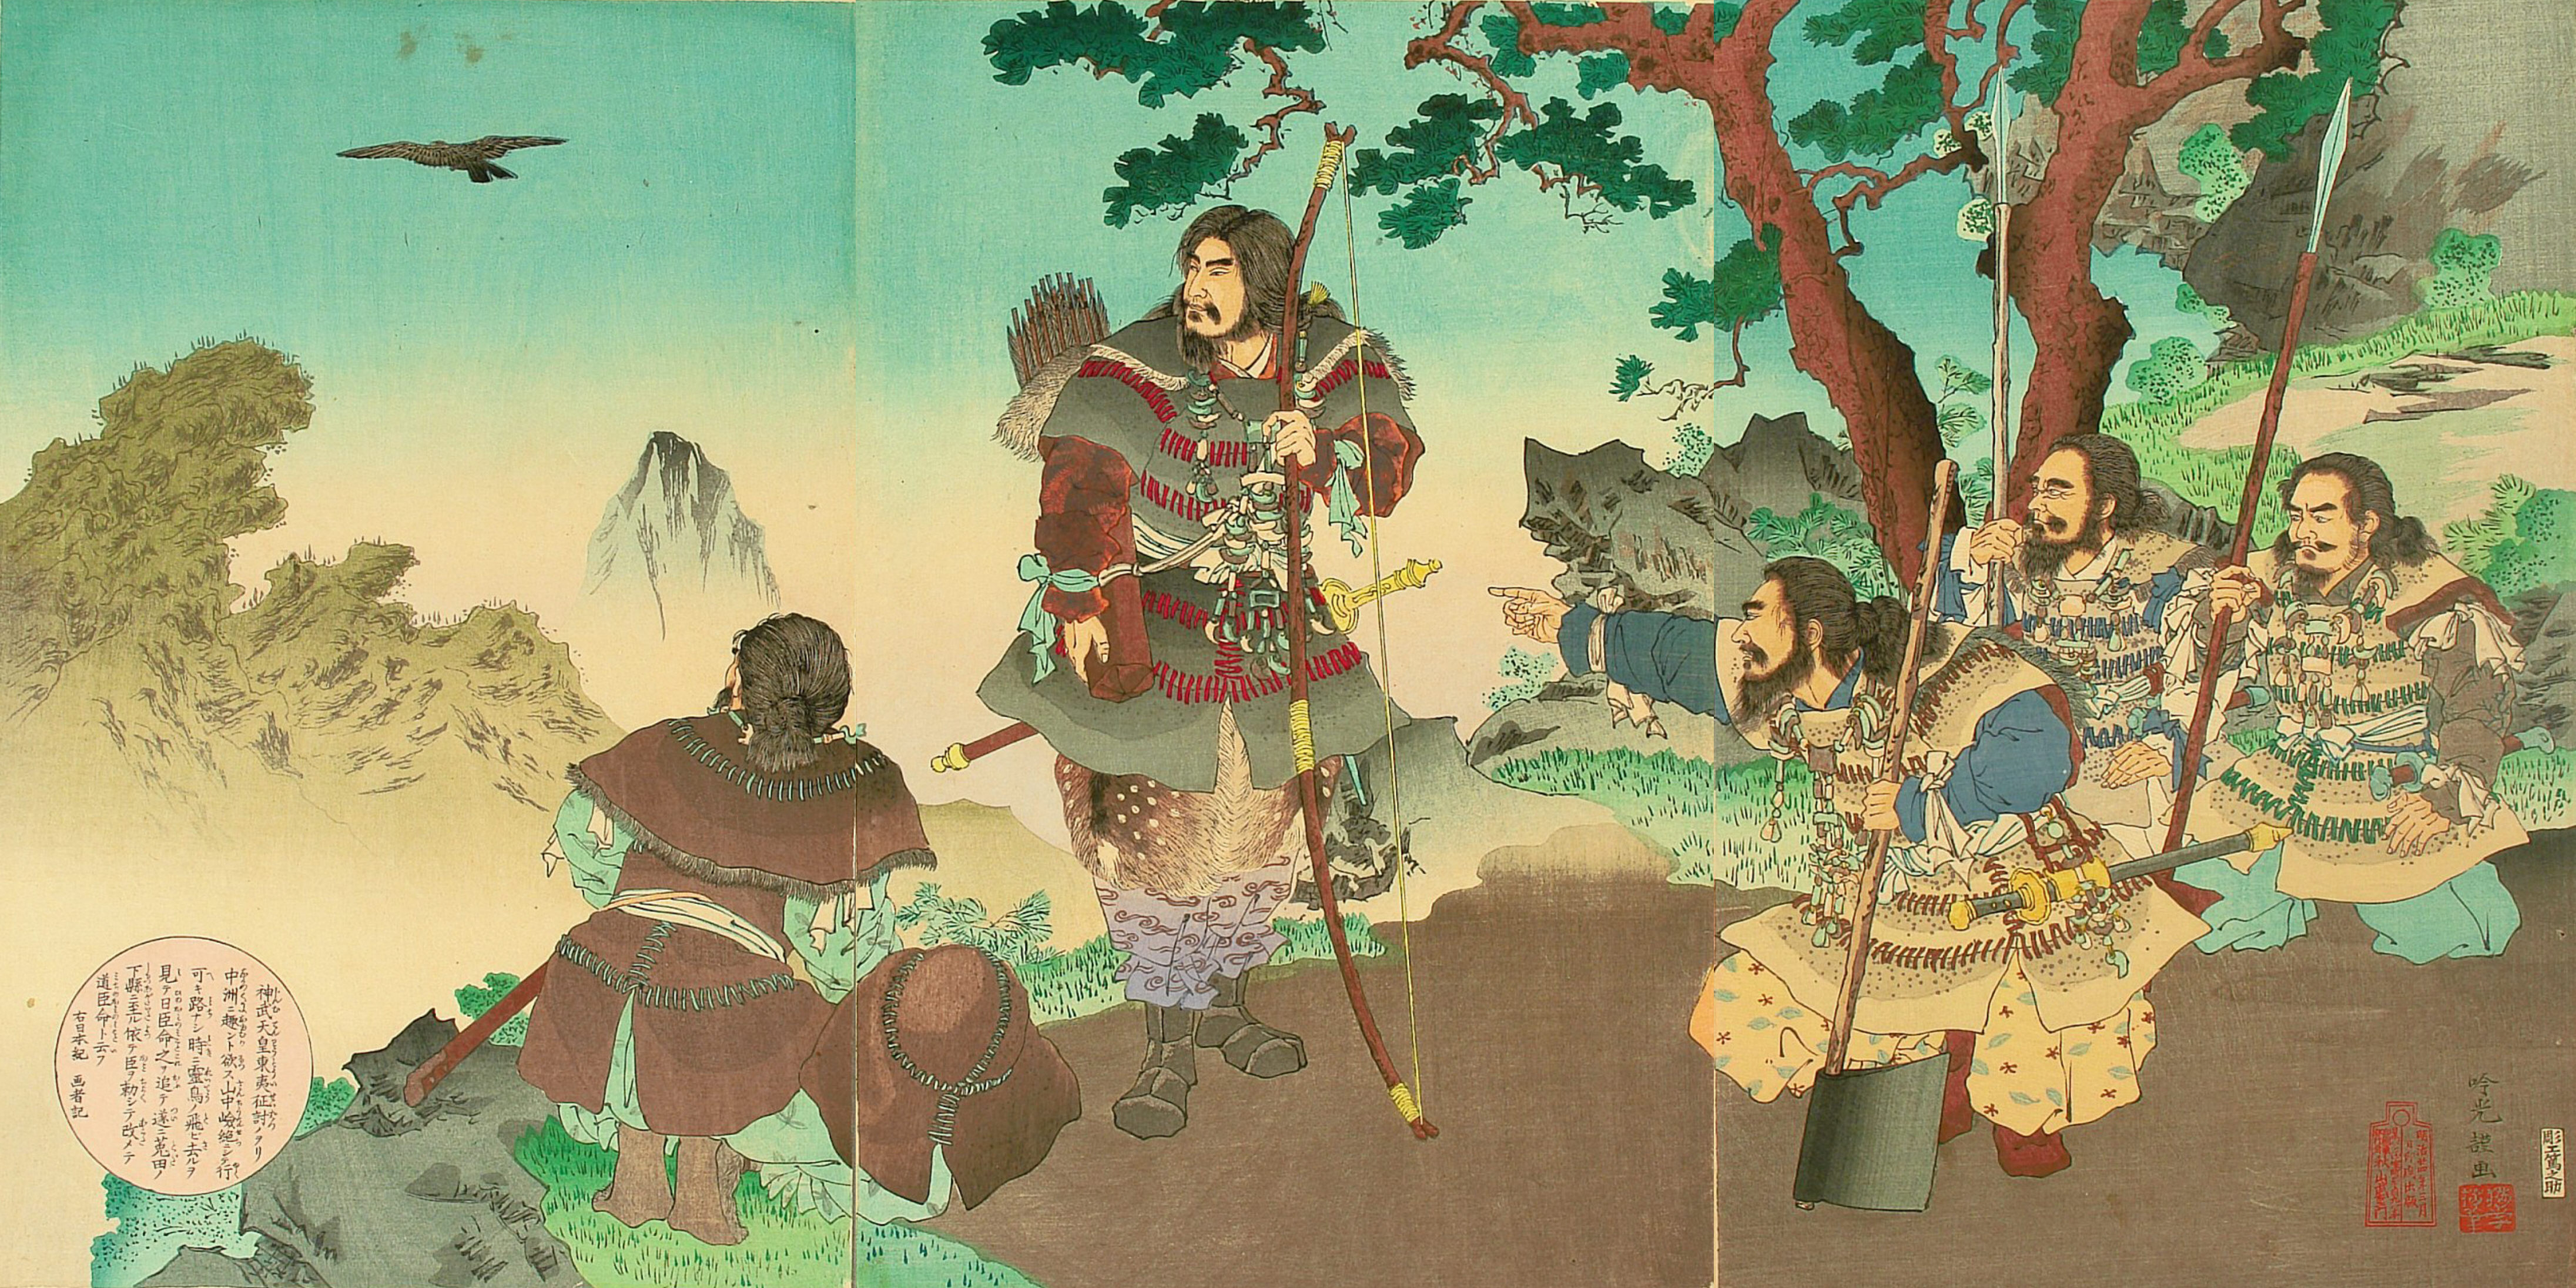 A traditional japanese woodblock print depicting five samurai warriors in a mountainous landscape with trees and soaring birds.